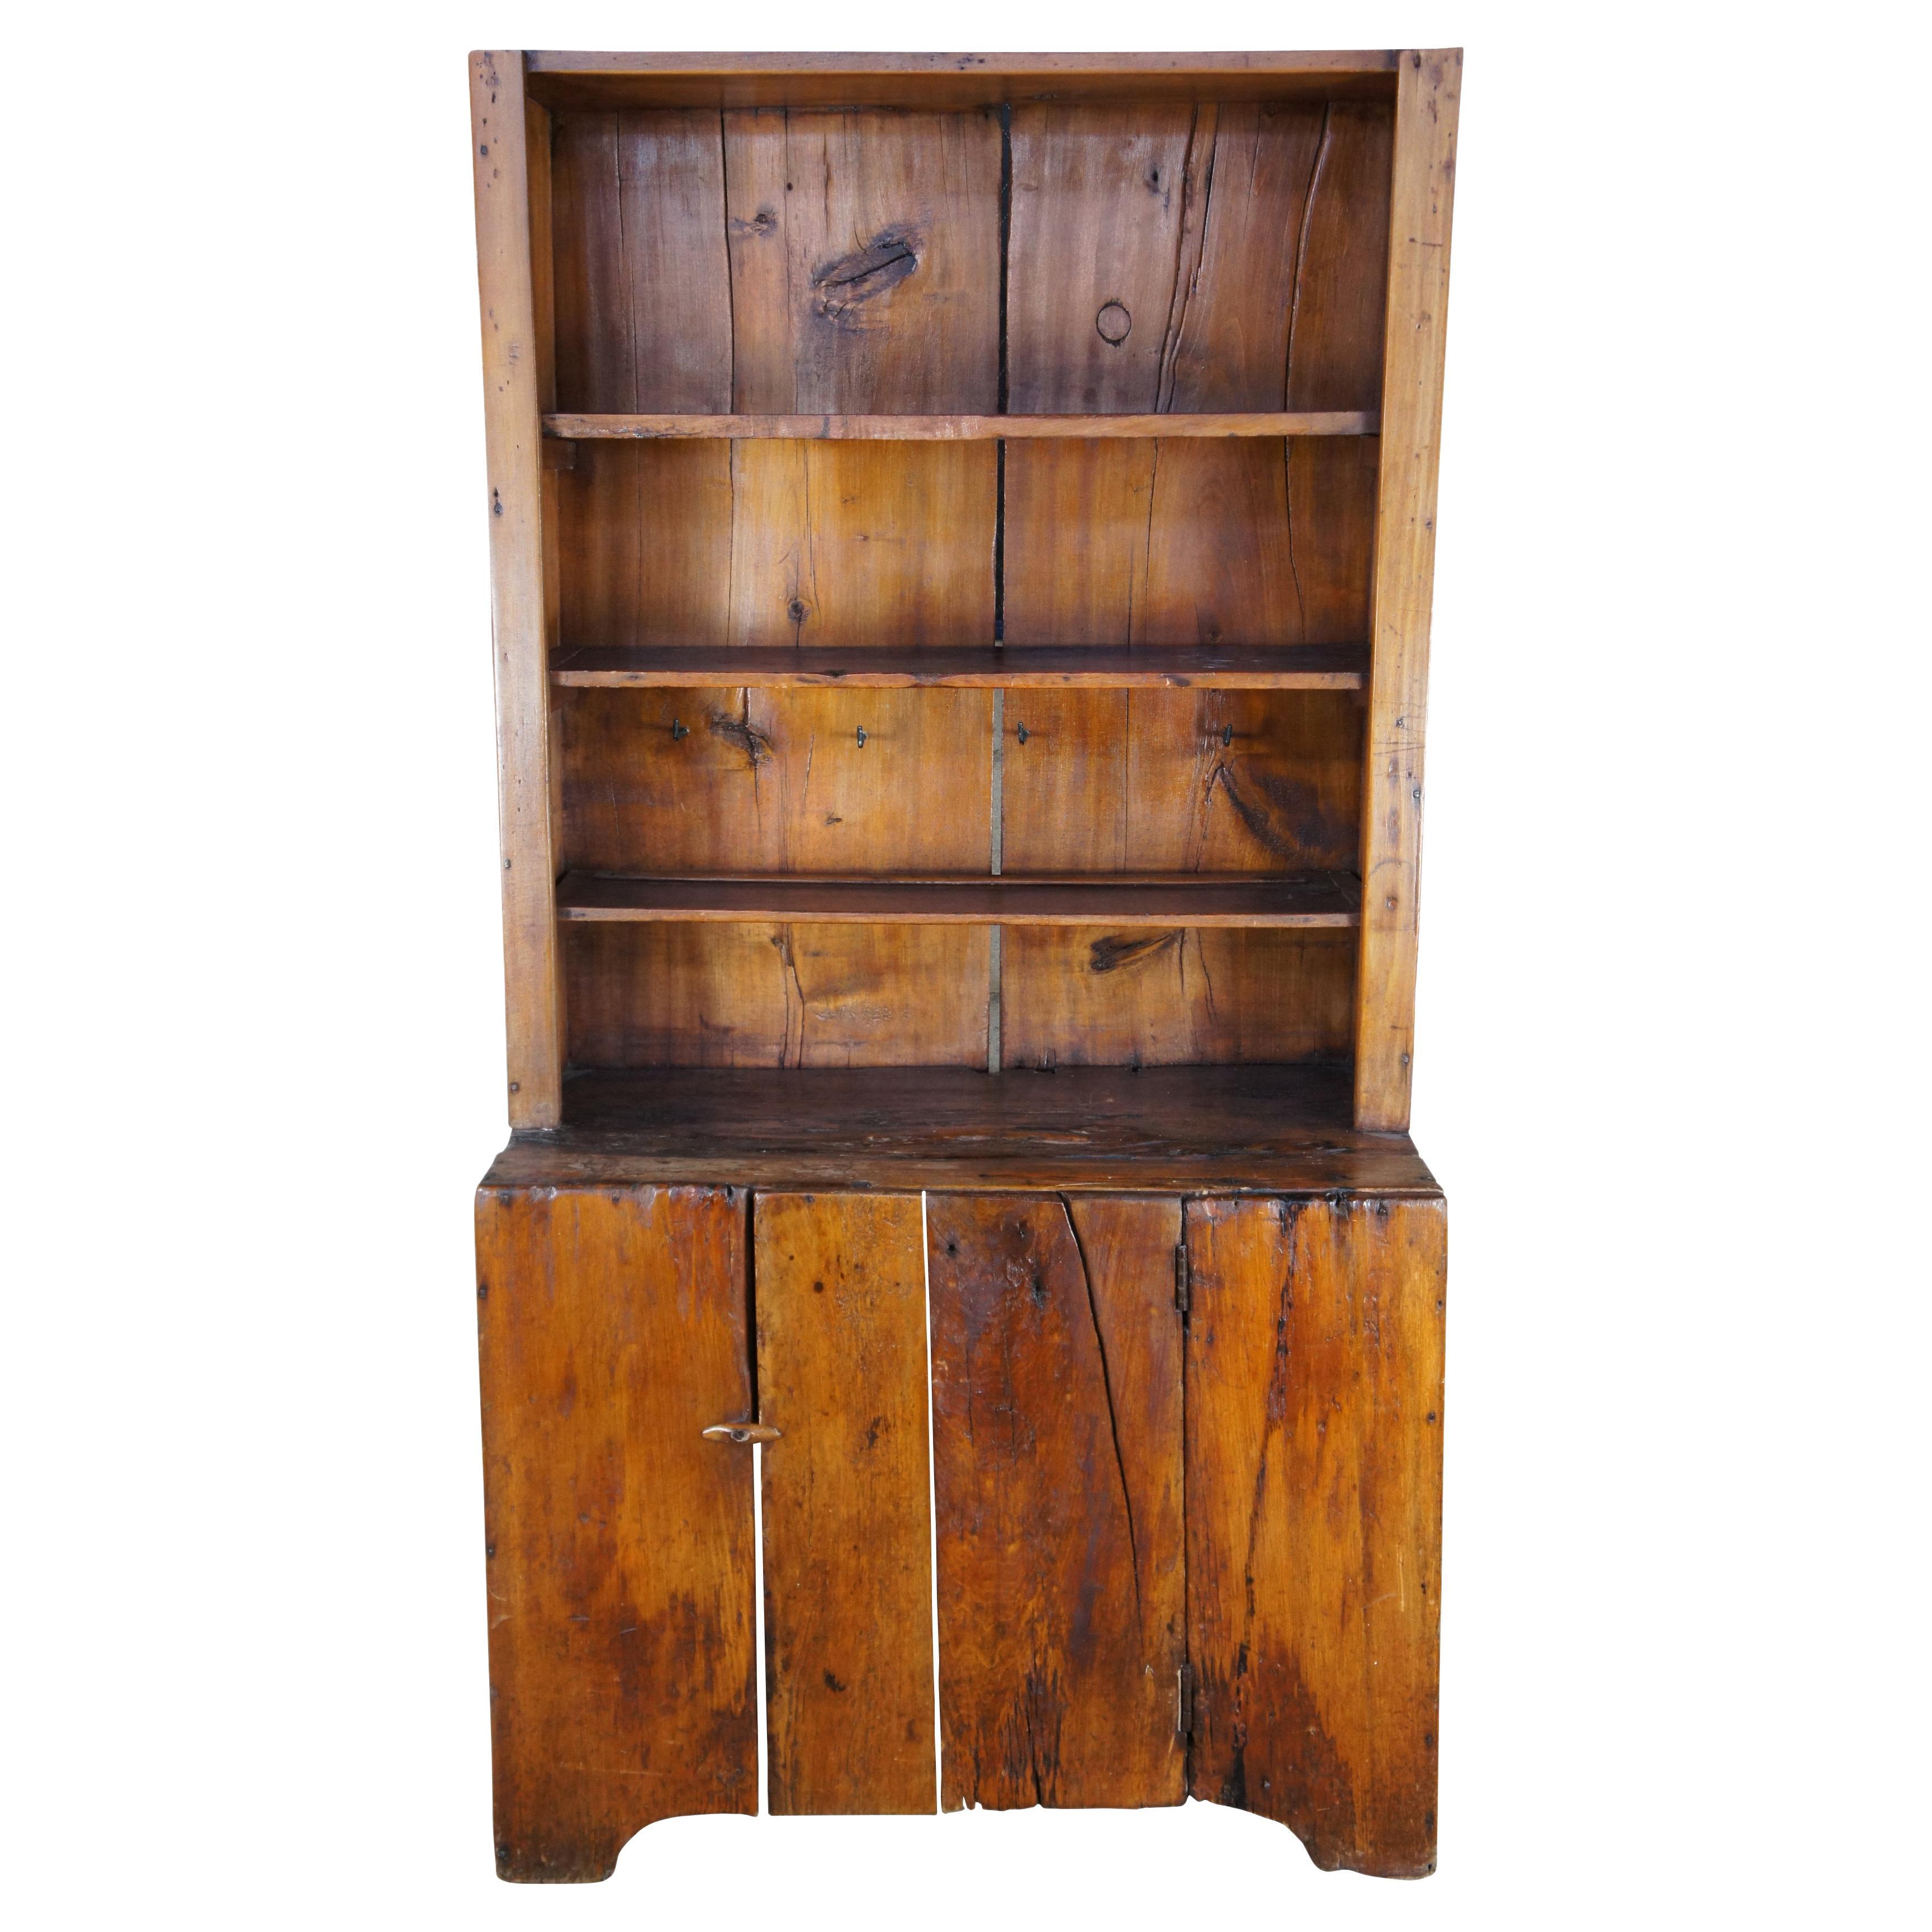 An American Victorian Era crotch walnut three drawer stepback chest of drawers with glove box drawers, circa 1870s. Includes two smaller drawers over four larger drawers. Hand dovetailed with 